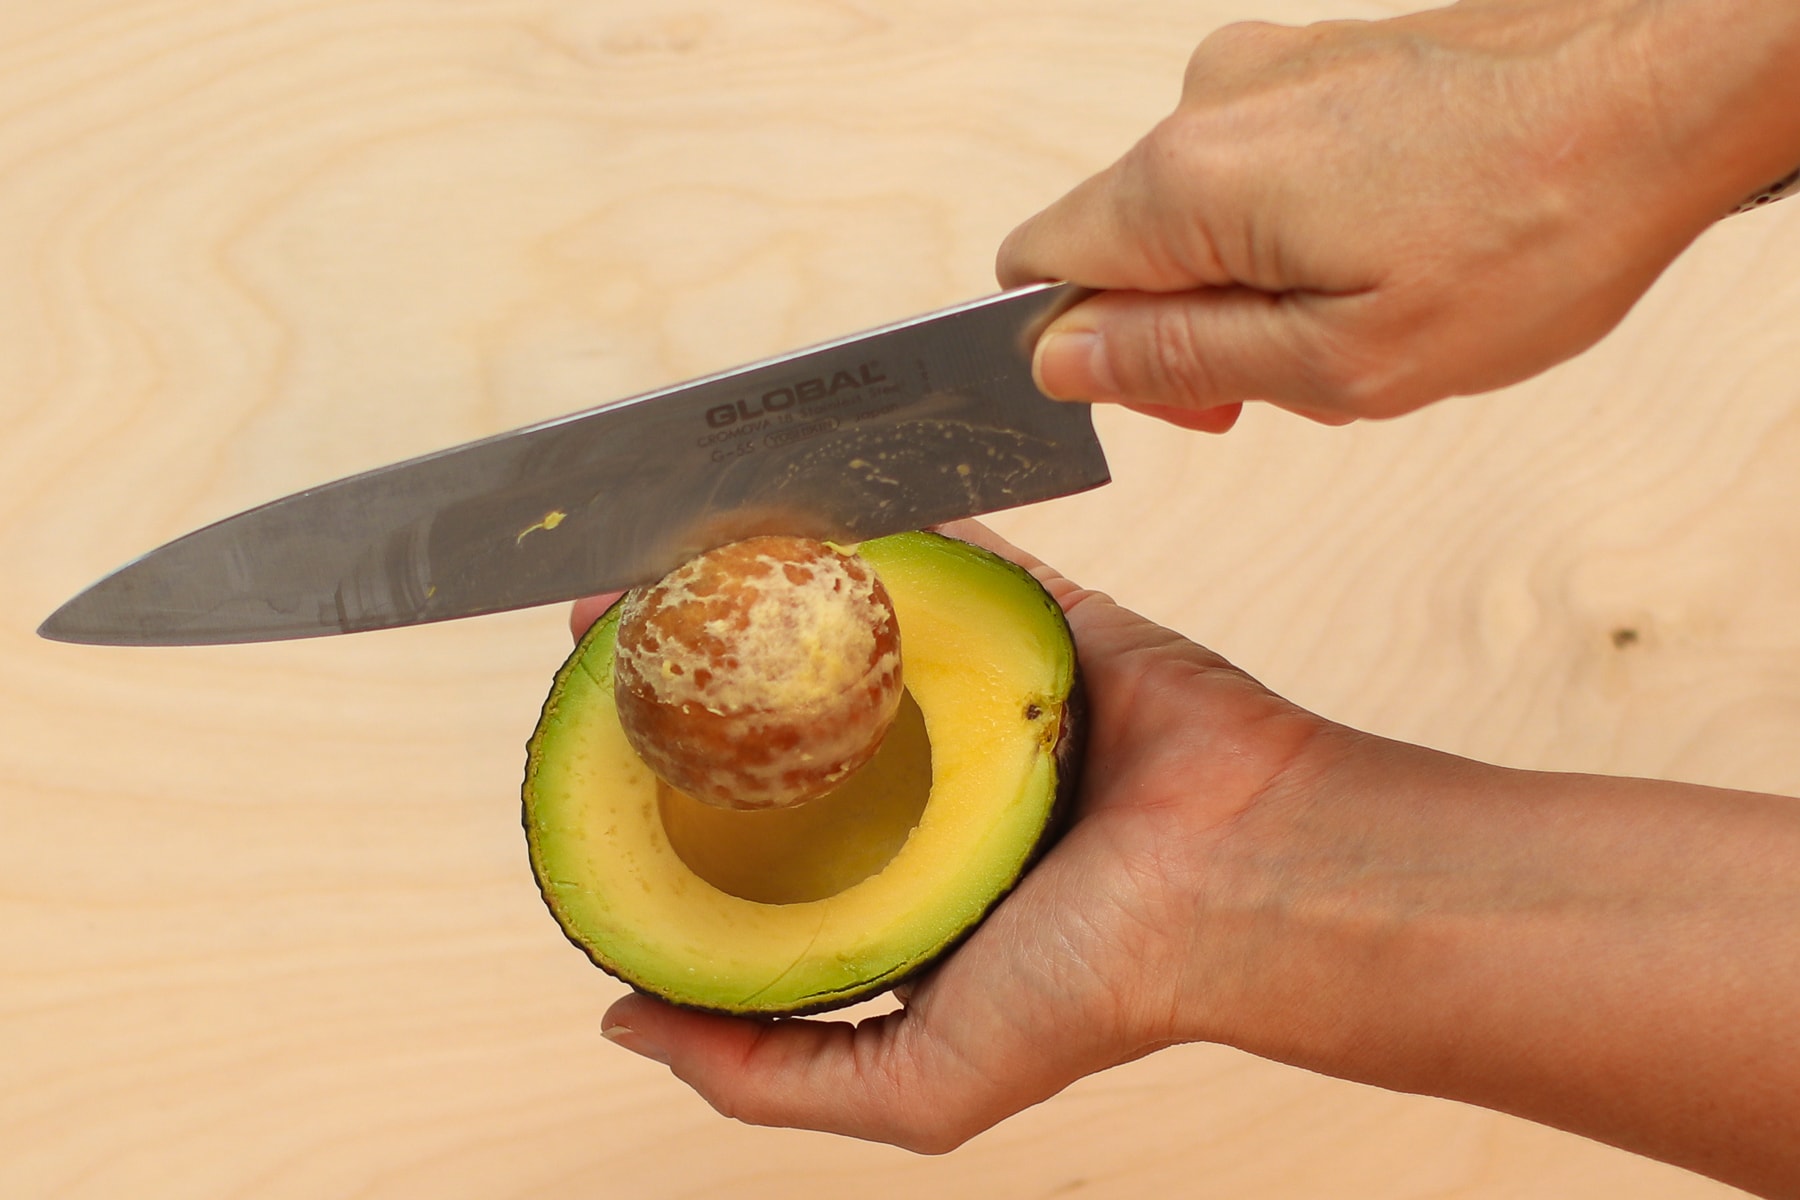 I'm holding a knife, the blade of which isinserted into an avocado, and pulling the pit out. 